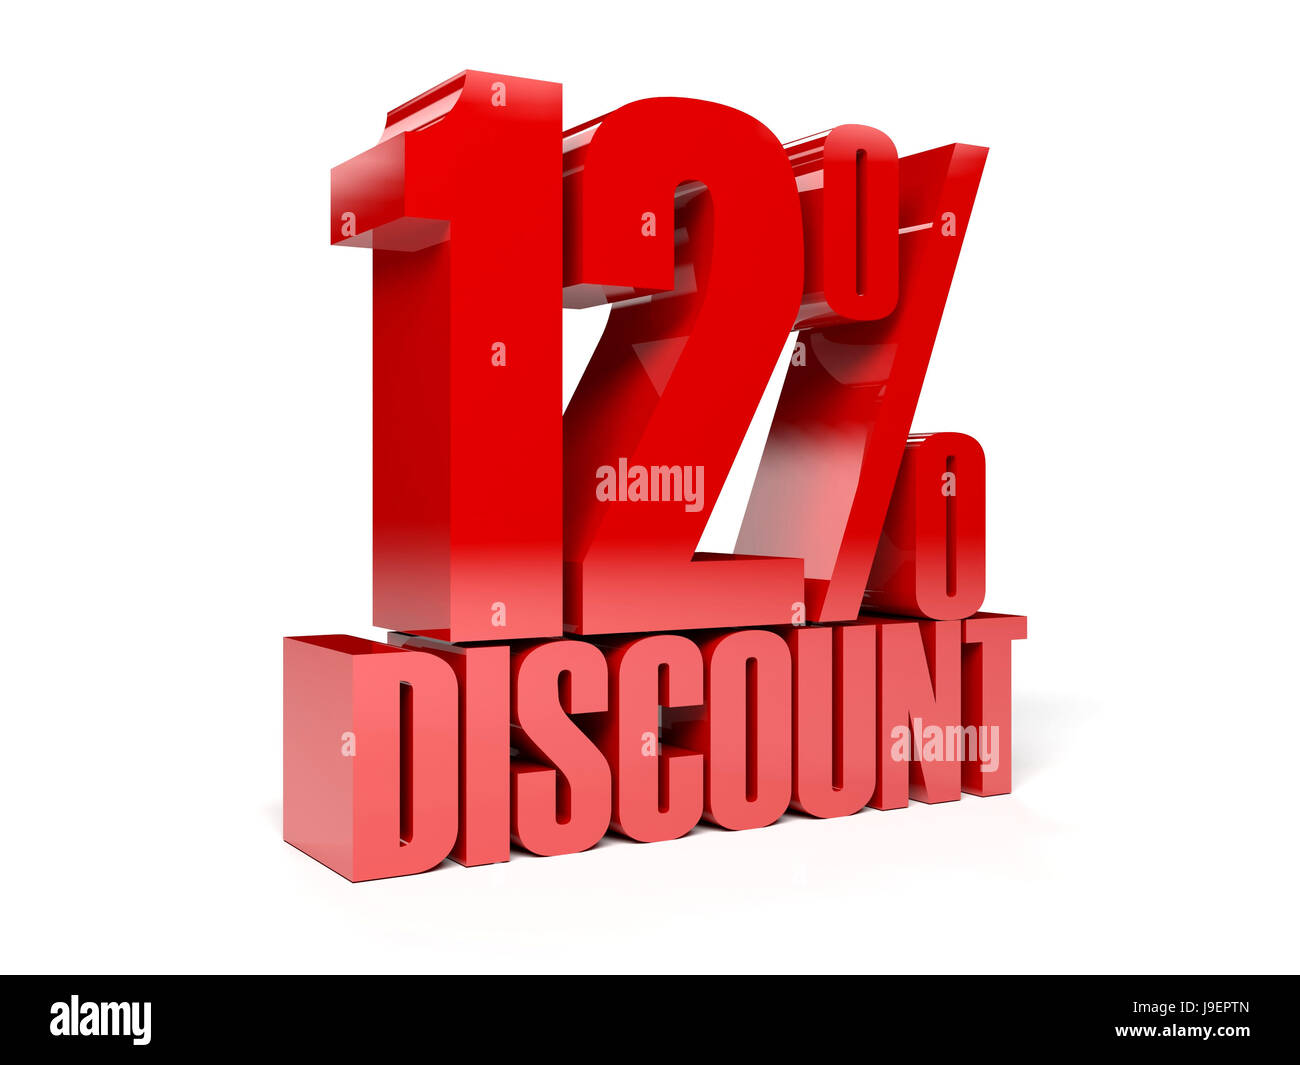 12TH - Red 3D Twelfth Text Isolated on White Stock Illustration